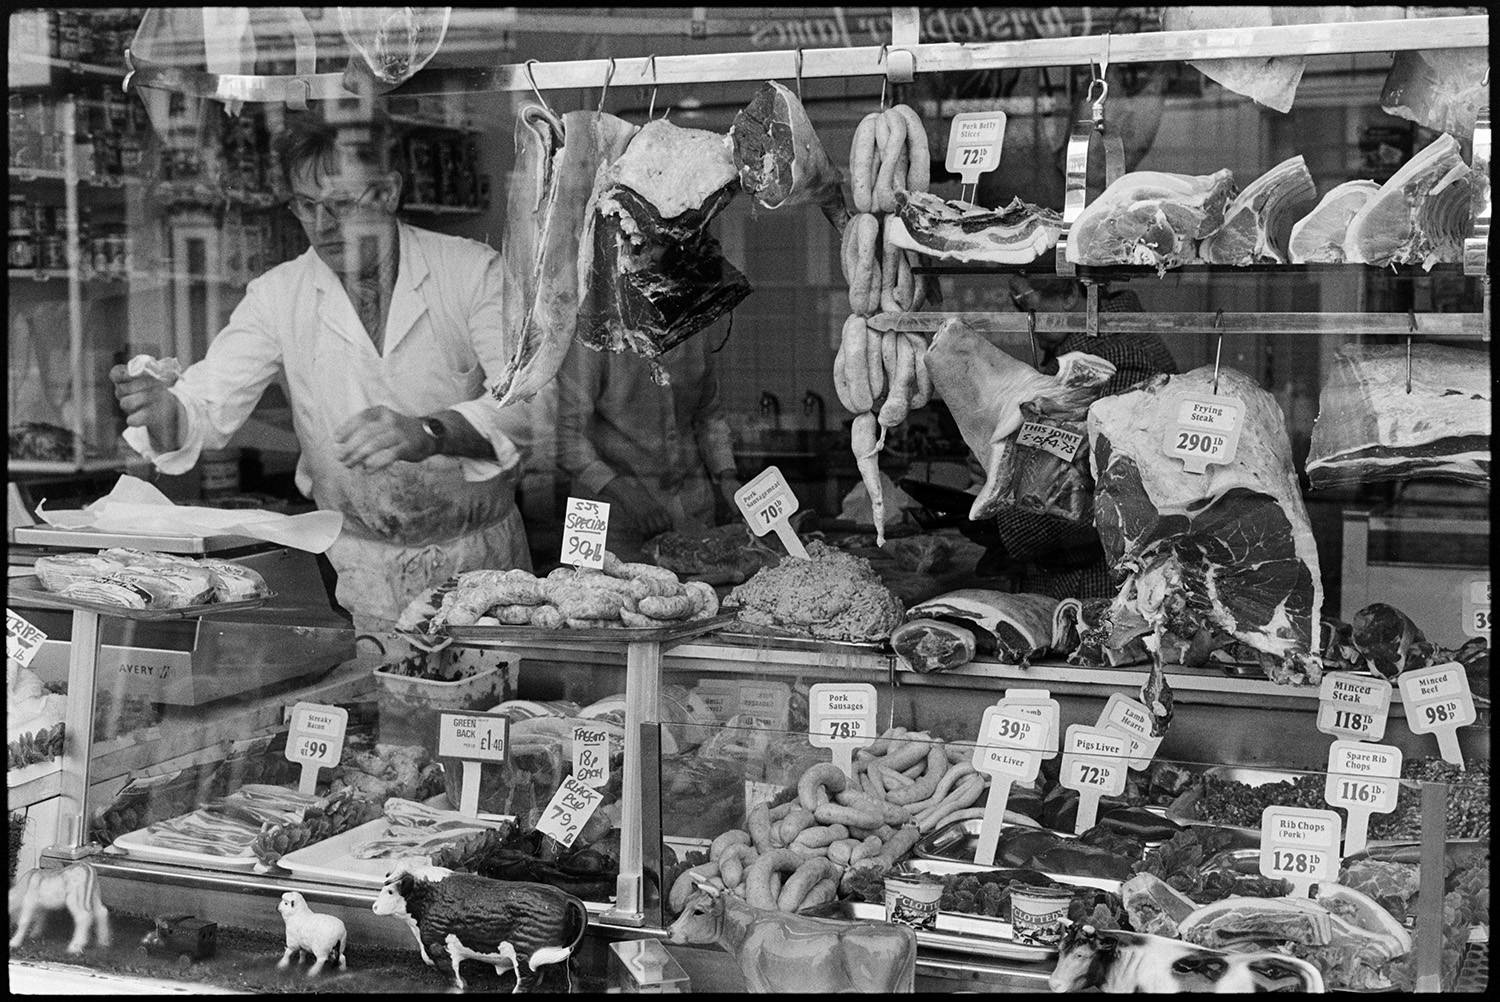 Front of butchers shop with butcher weighing meat.
[The shop front window of a butcher's shop in Butchers Row, Barnstaple, with a butcher weighing out meat inside. The shop window full of meat is on display, including sausages, chops, minced beef and steaks. Meat is also shown hanging from hooks with model farm animals on display in the window.]